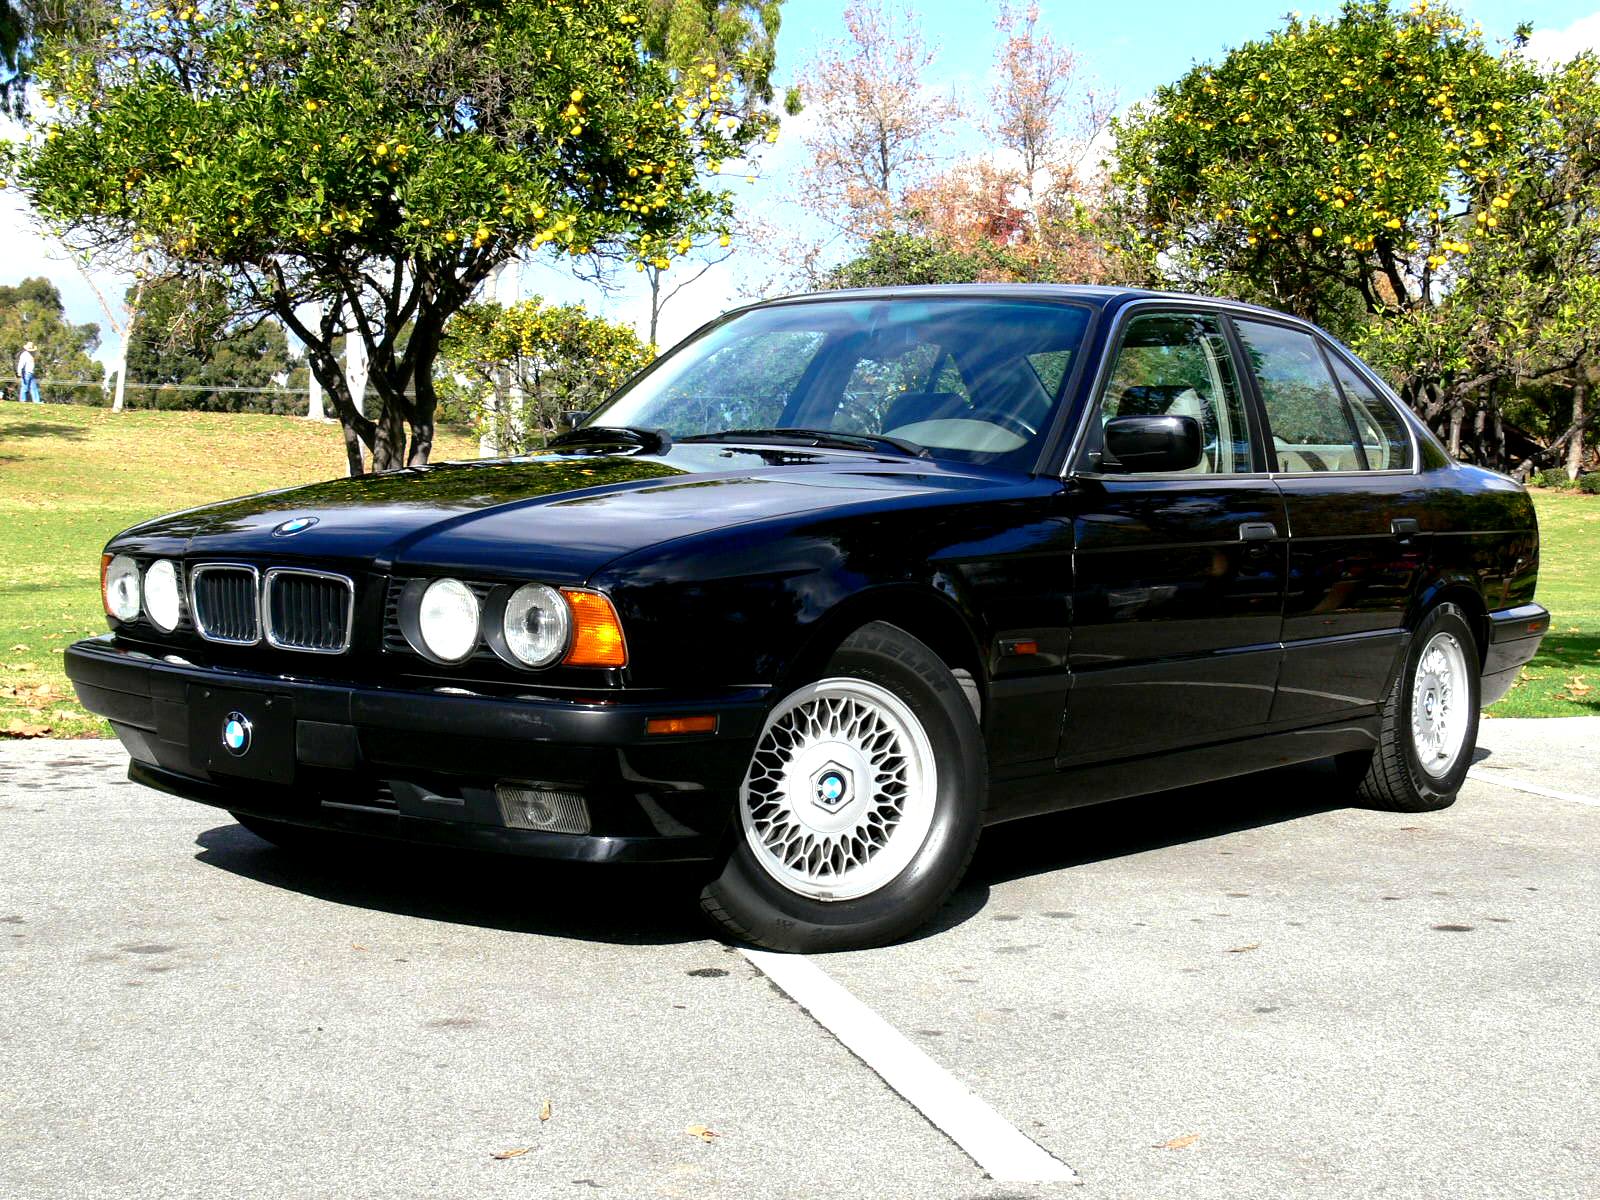 BMW 520i 1995 Review, Amazing Pictures and Images Look